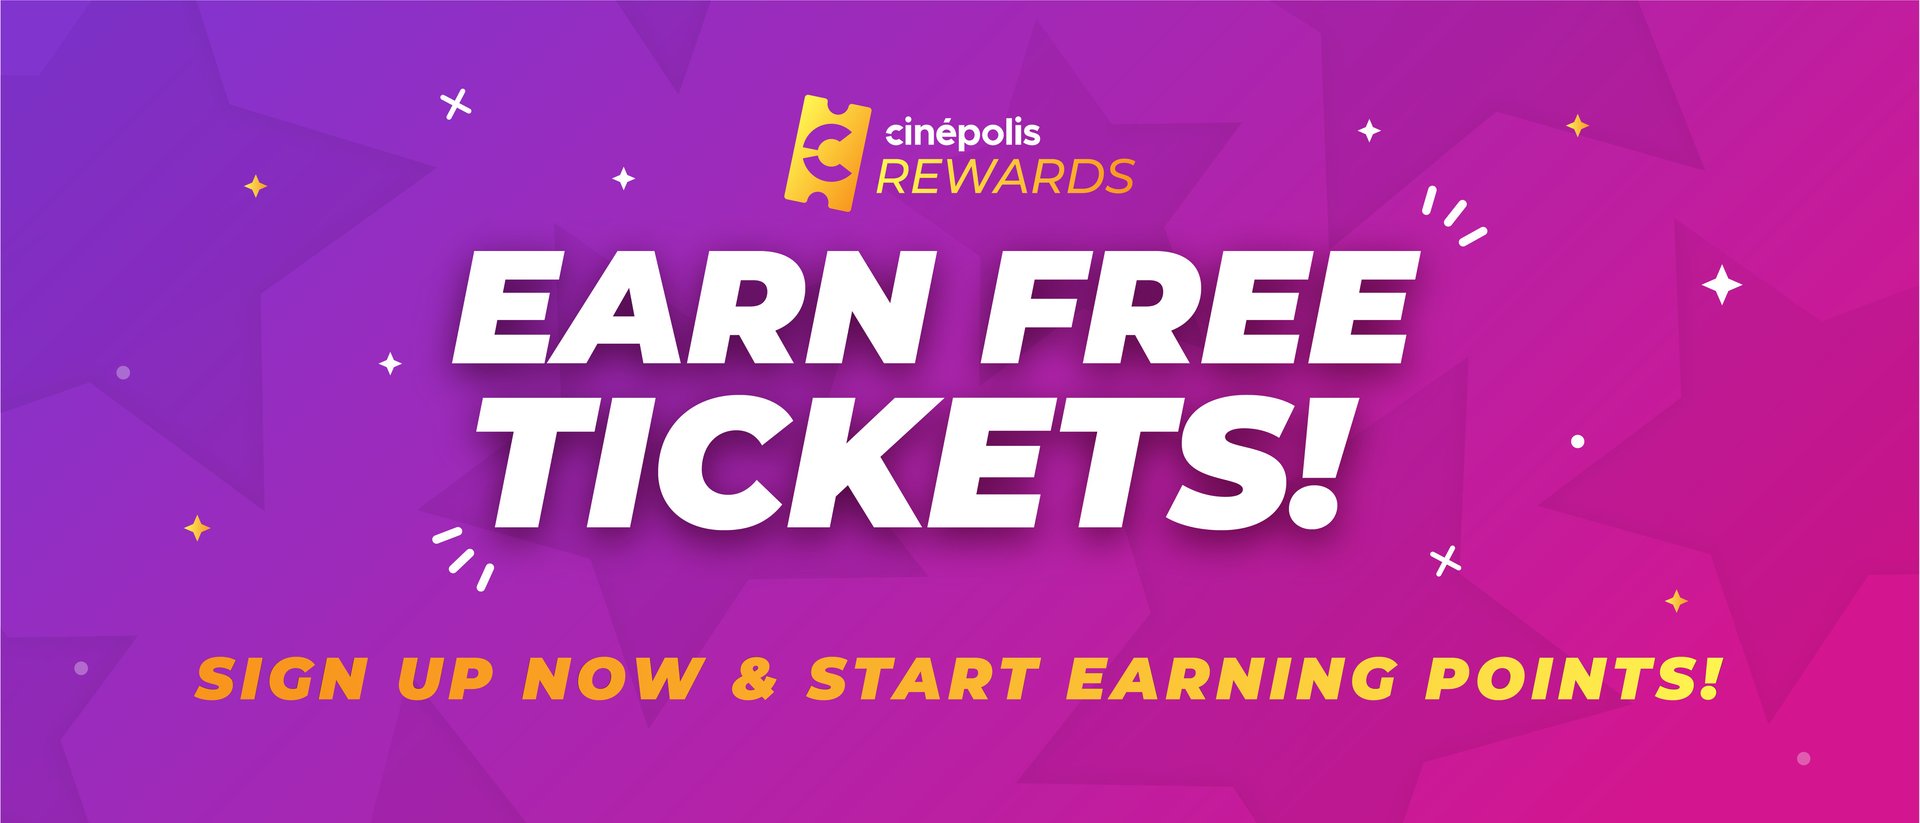 Earn Free Tickets to Cinepolis or Moviehouse